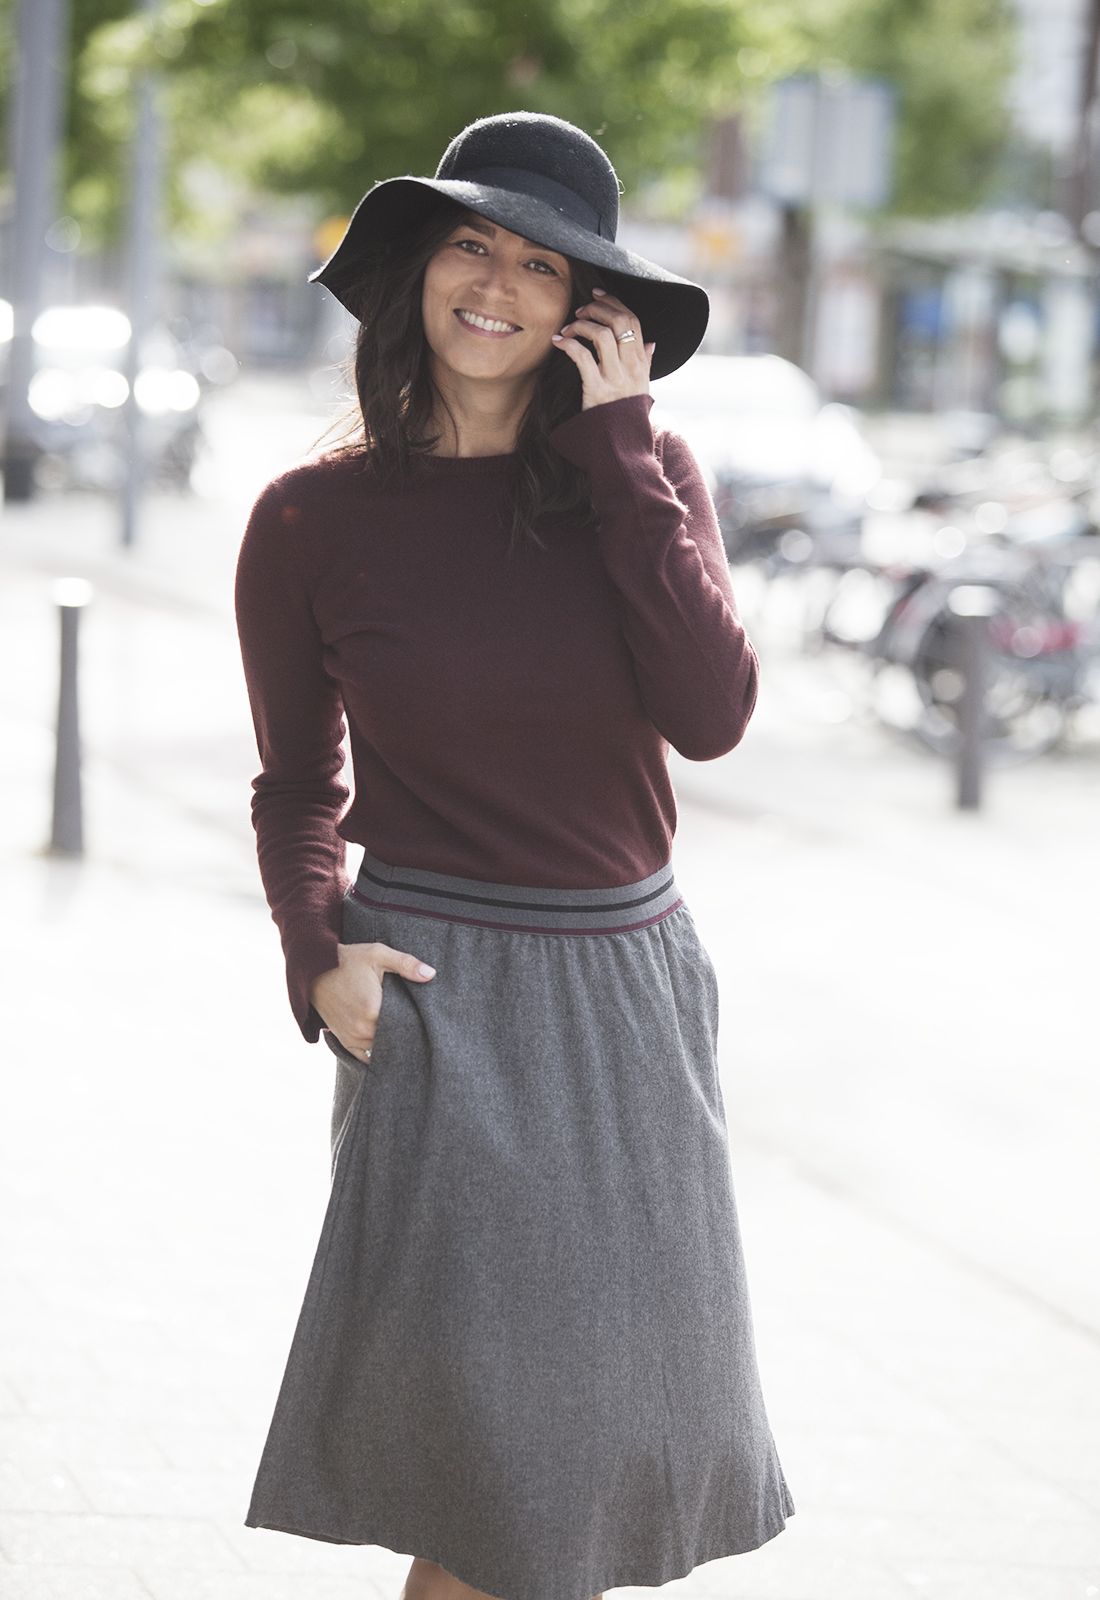 Fedora hat streetstyle fall 2016 Blogforshops look for Gerz Rotterdam